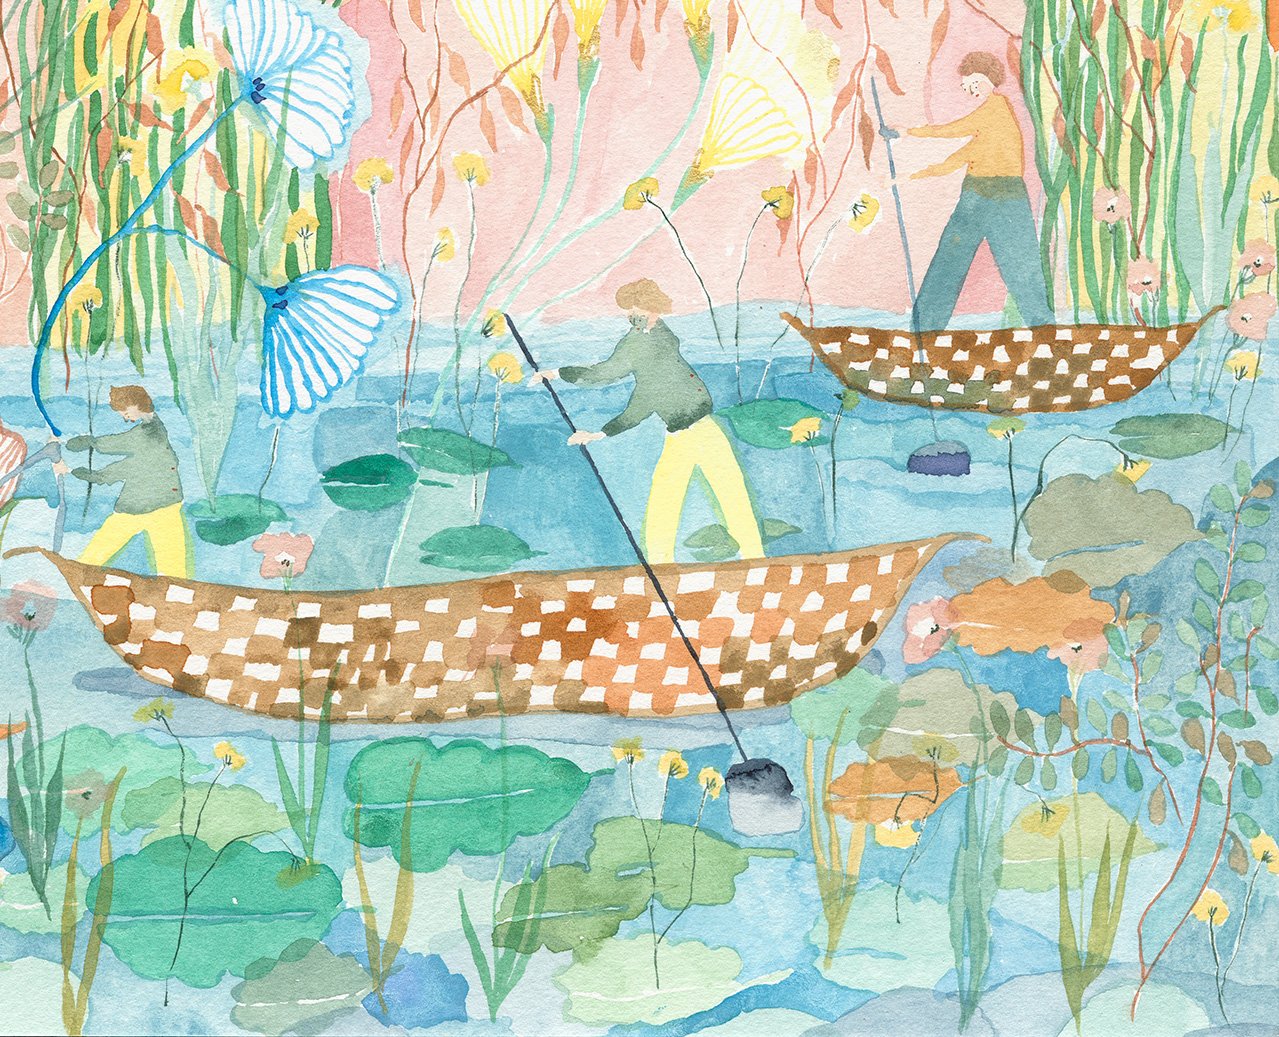   The Lily Pond, detail   Watercolor on paper, 2021  11” x 14”  Sold 